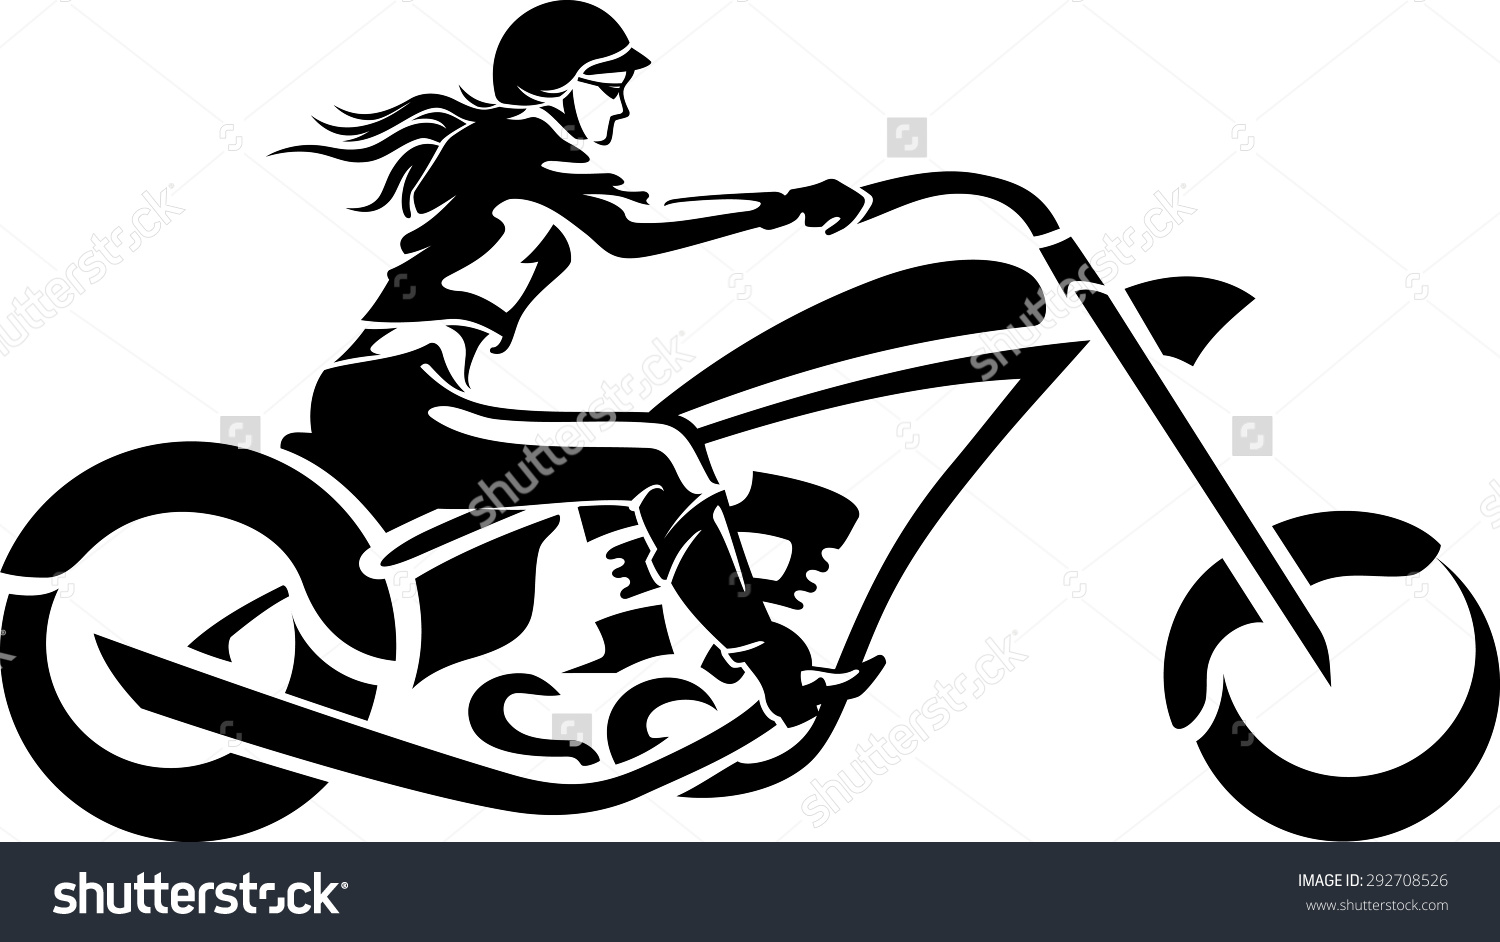 Woman Driving Chopper Motorcycle Stock Vector 292708526.